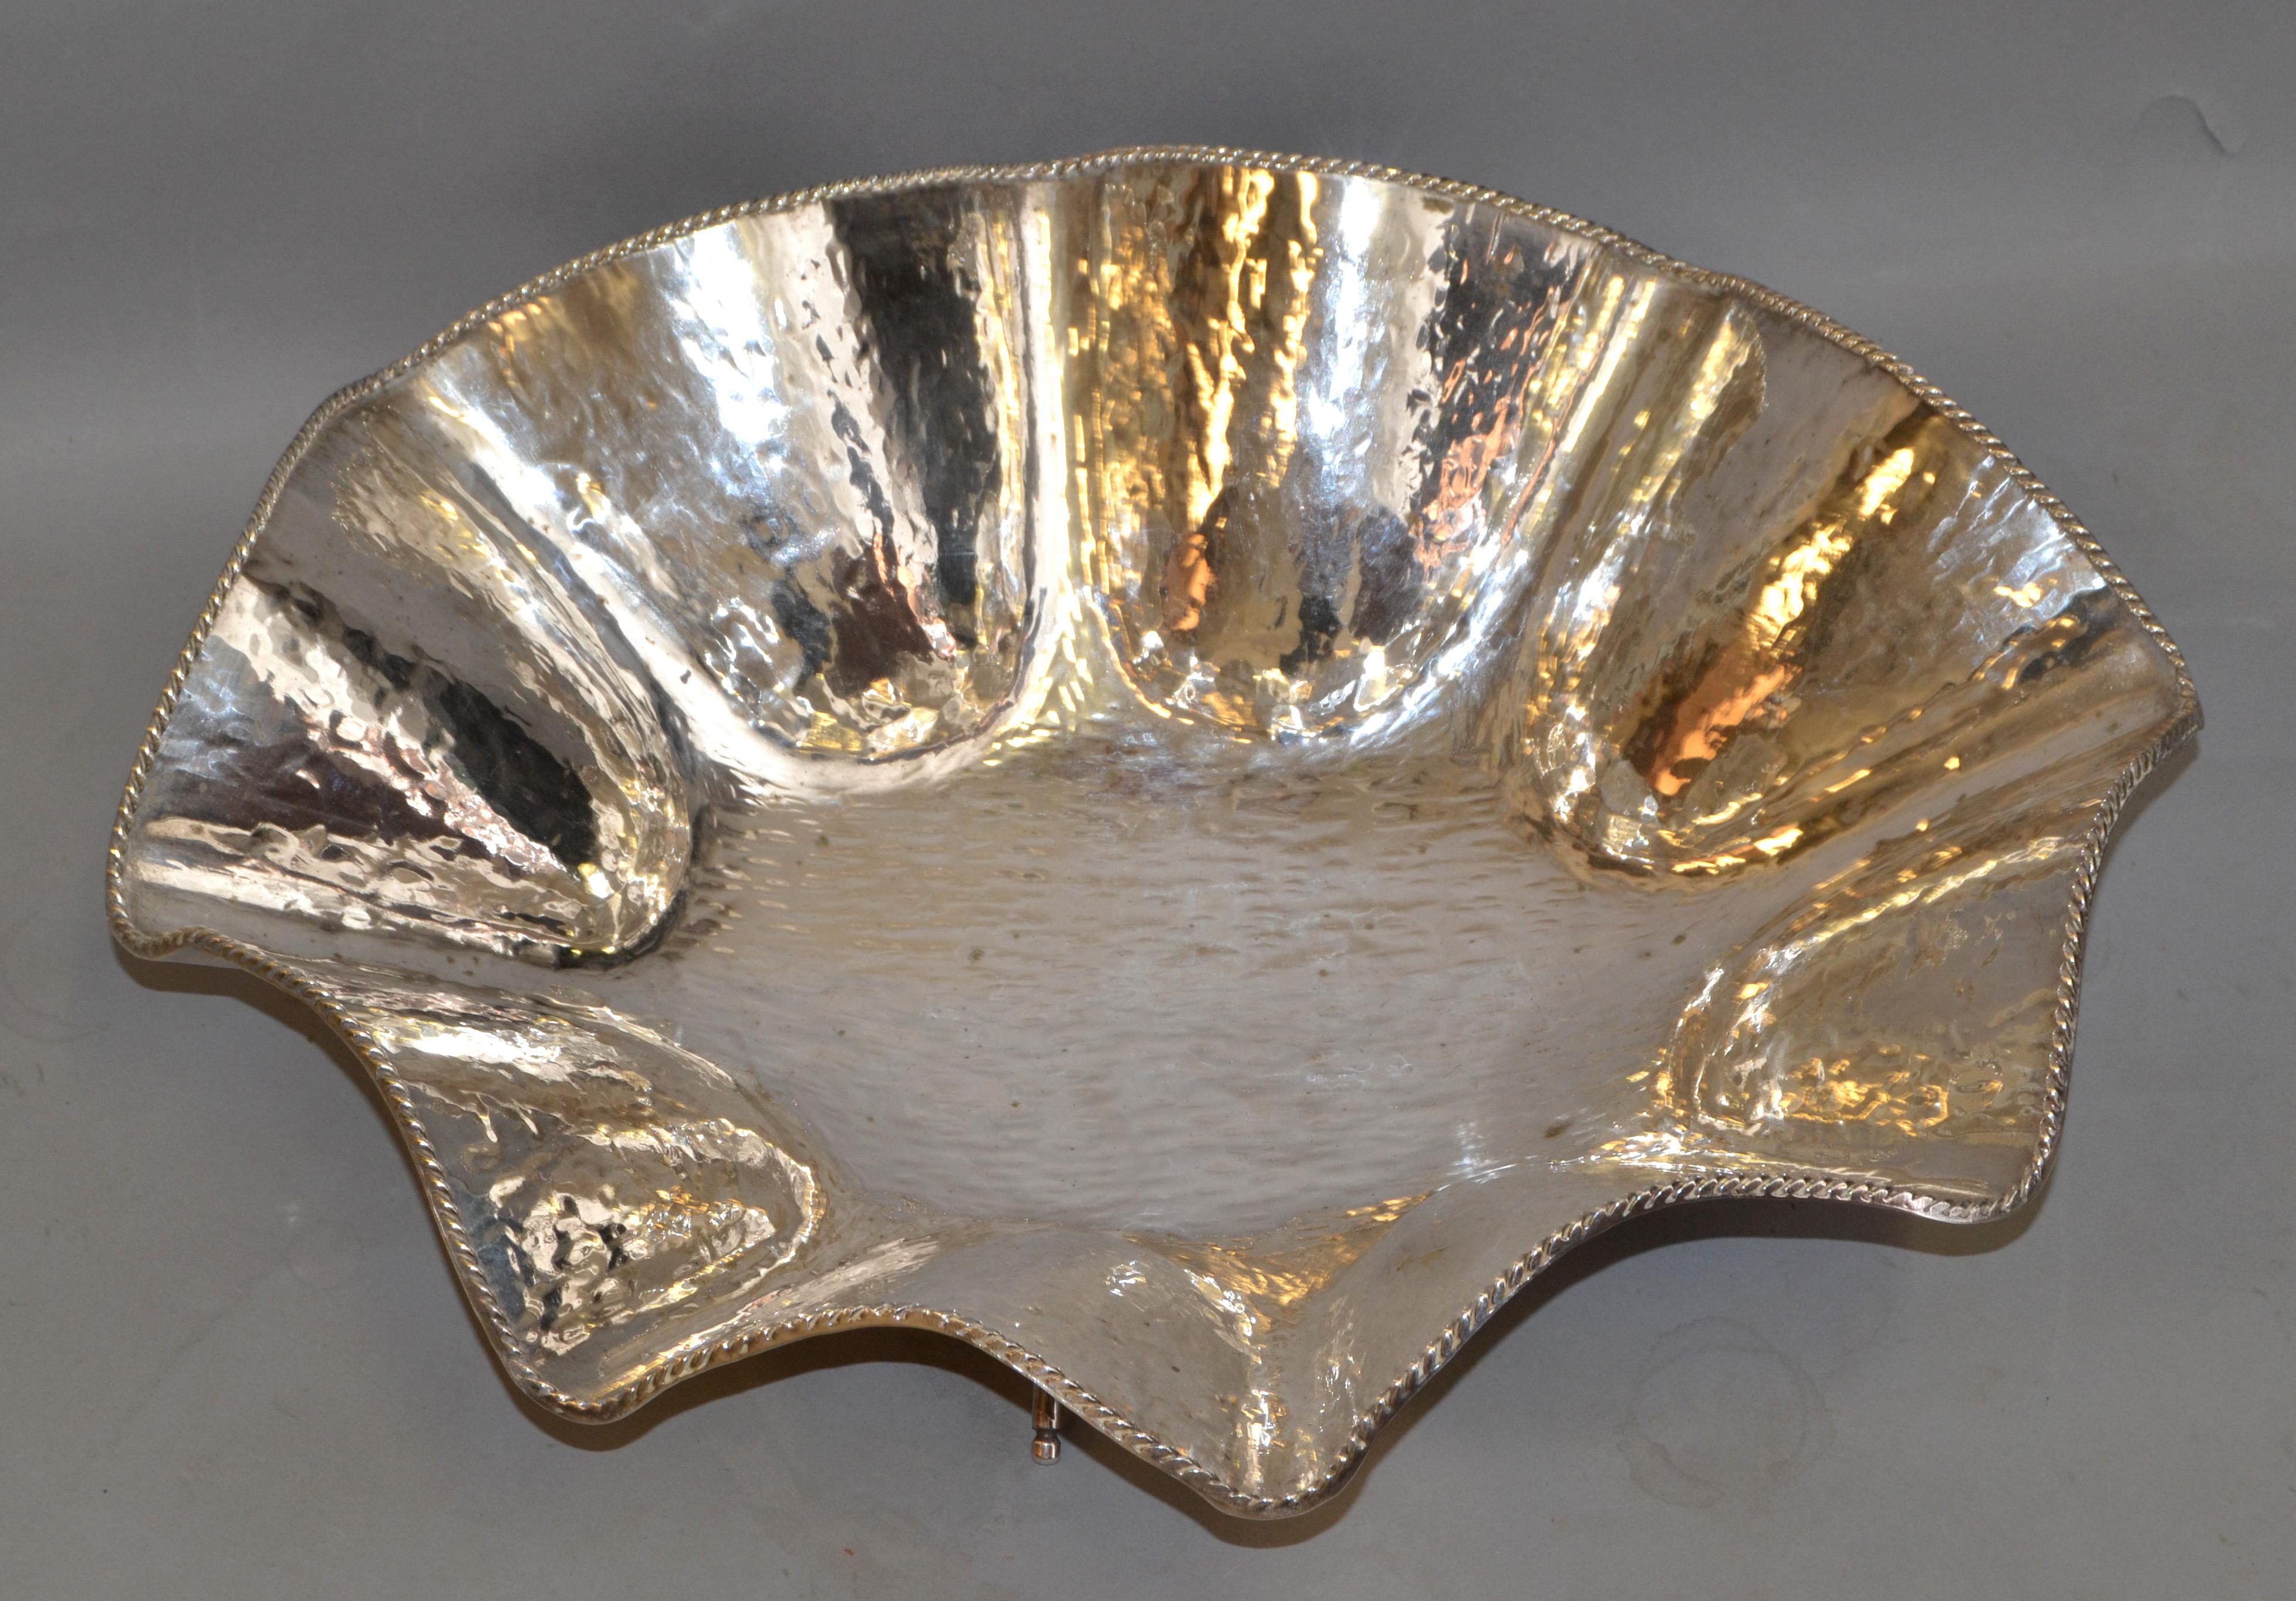 20th Century Hollywood Regency Large Hand Hammered Footed Silver-Plated Lotus Leaf Bowl, 1970